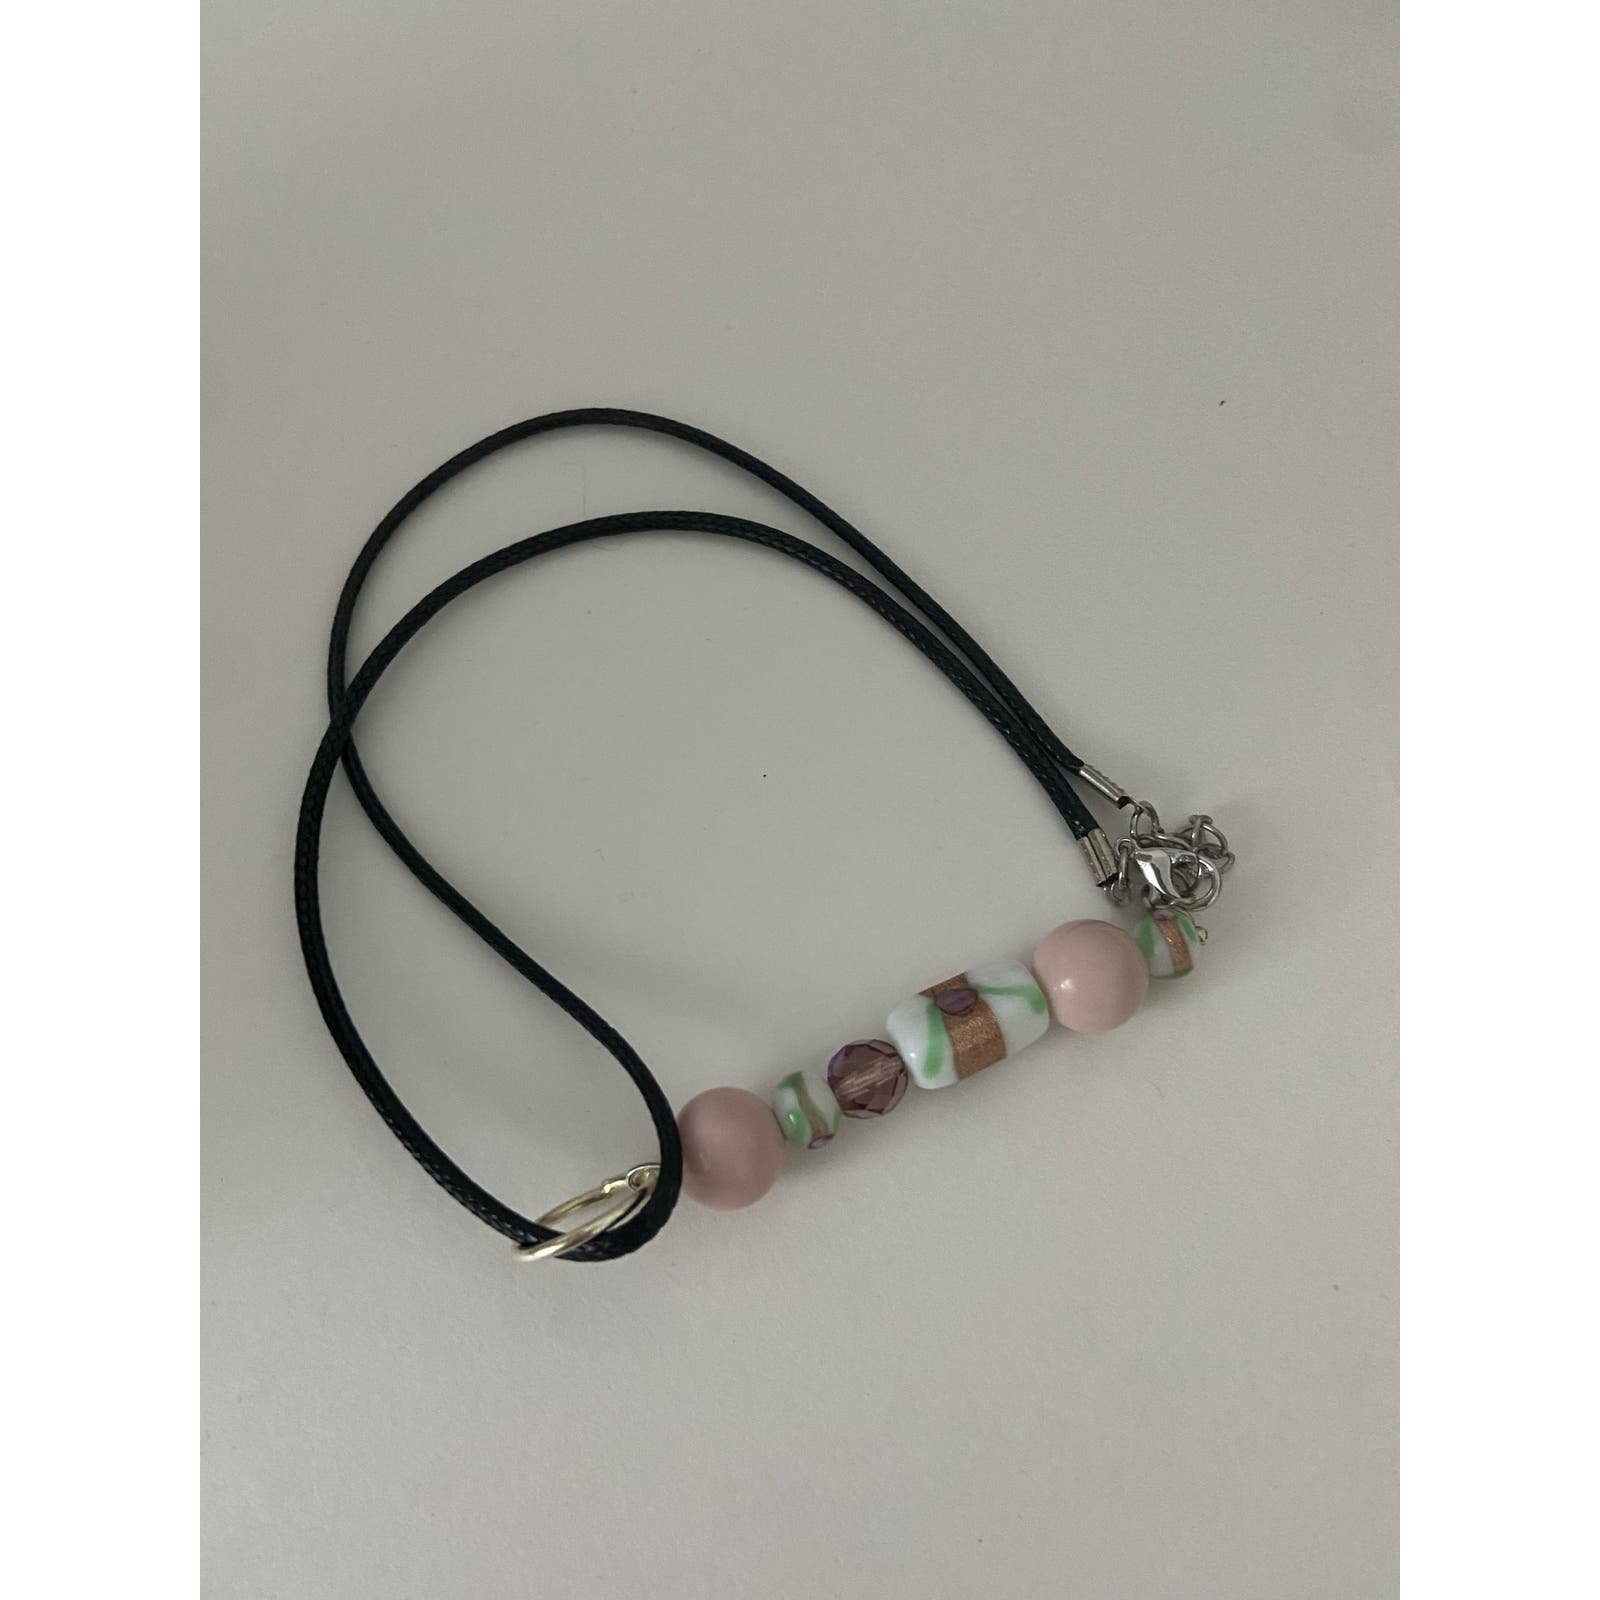 Buy Pink white and green ceramic bead pendant necklace Kckkfhbfd hot sale